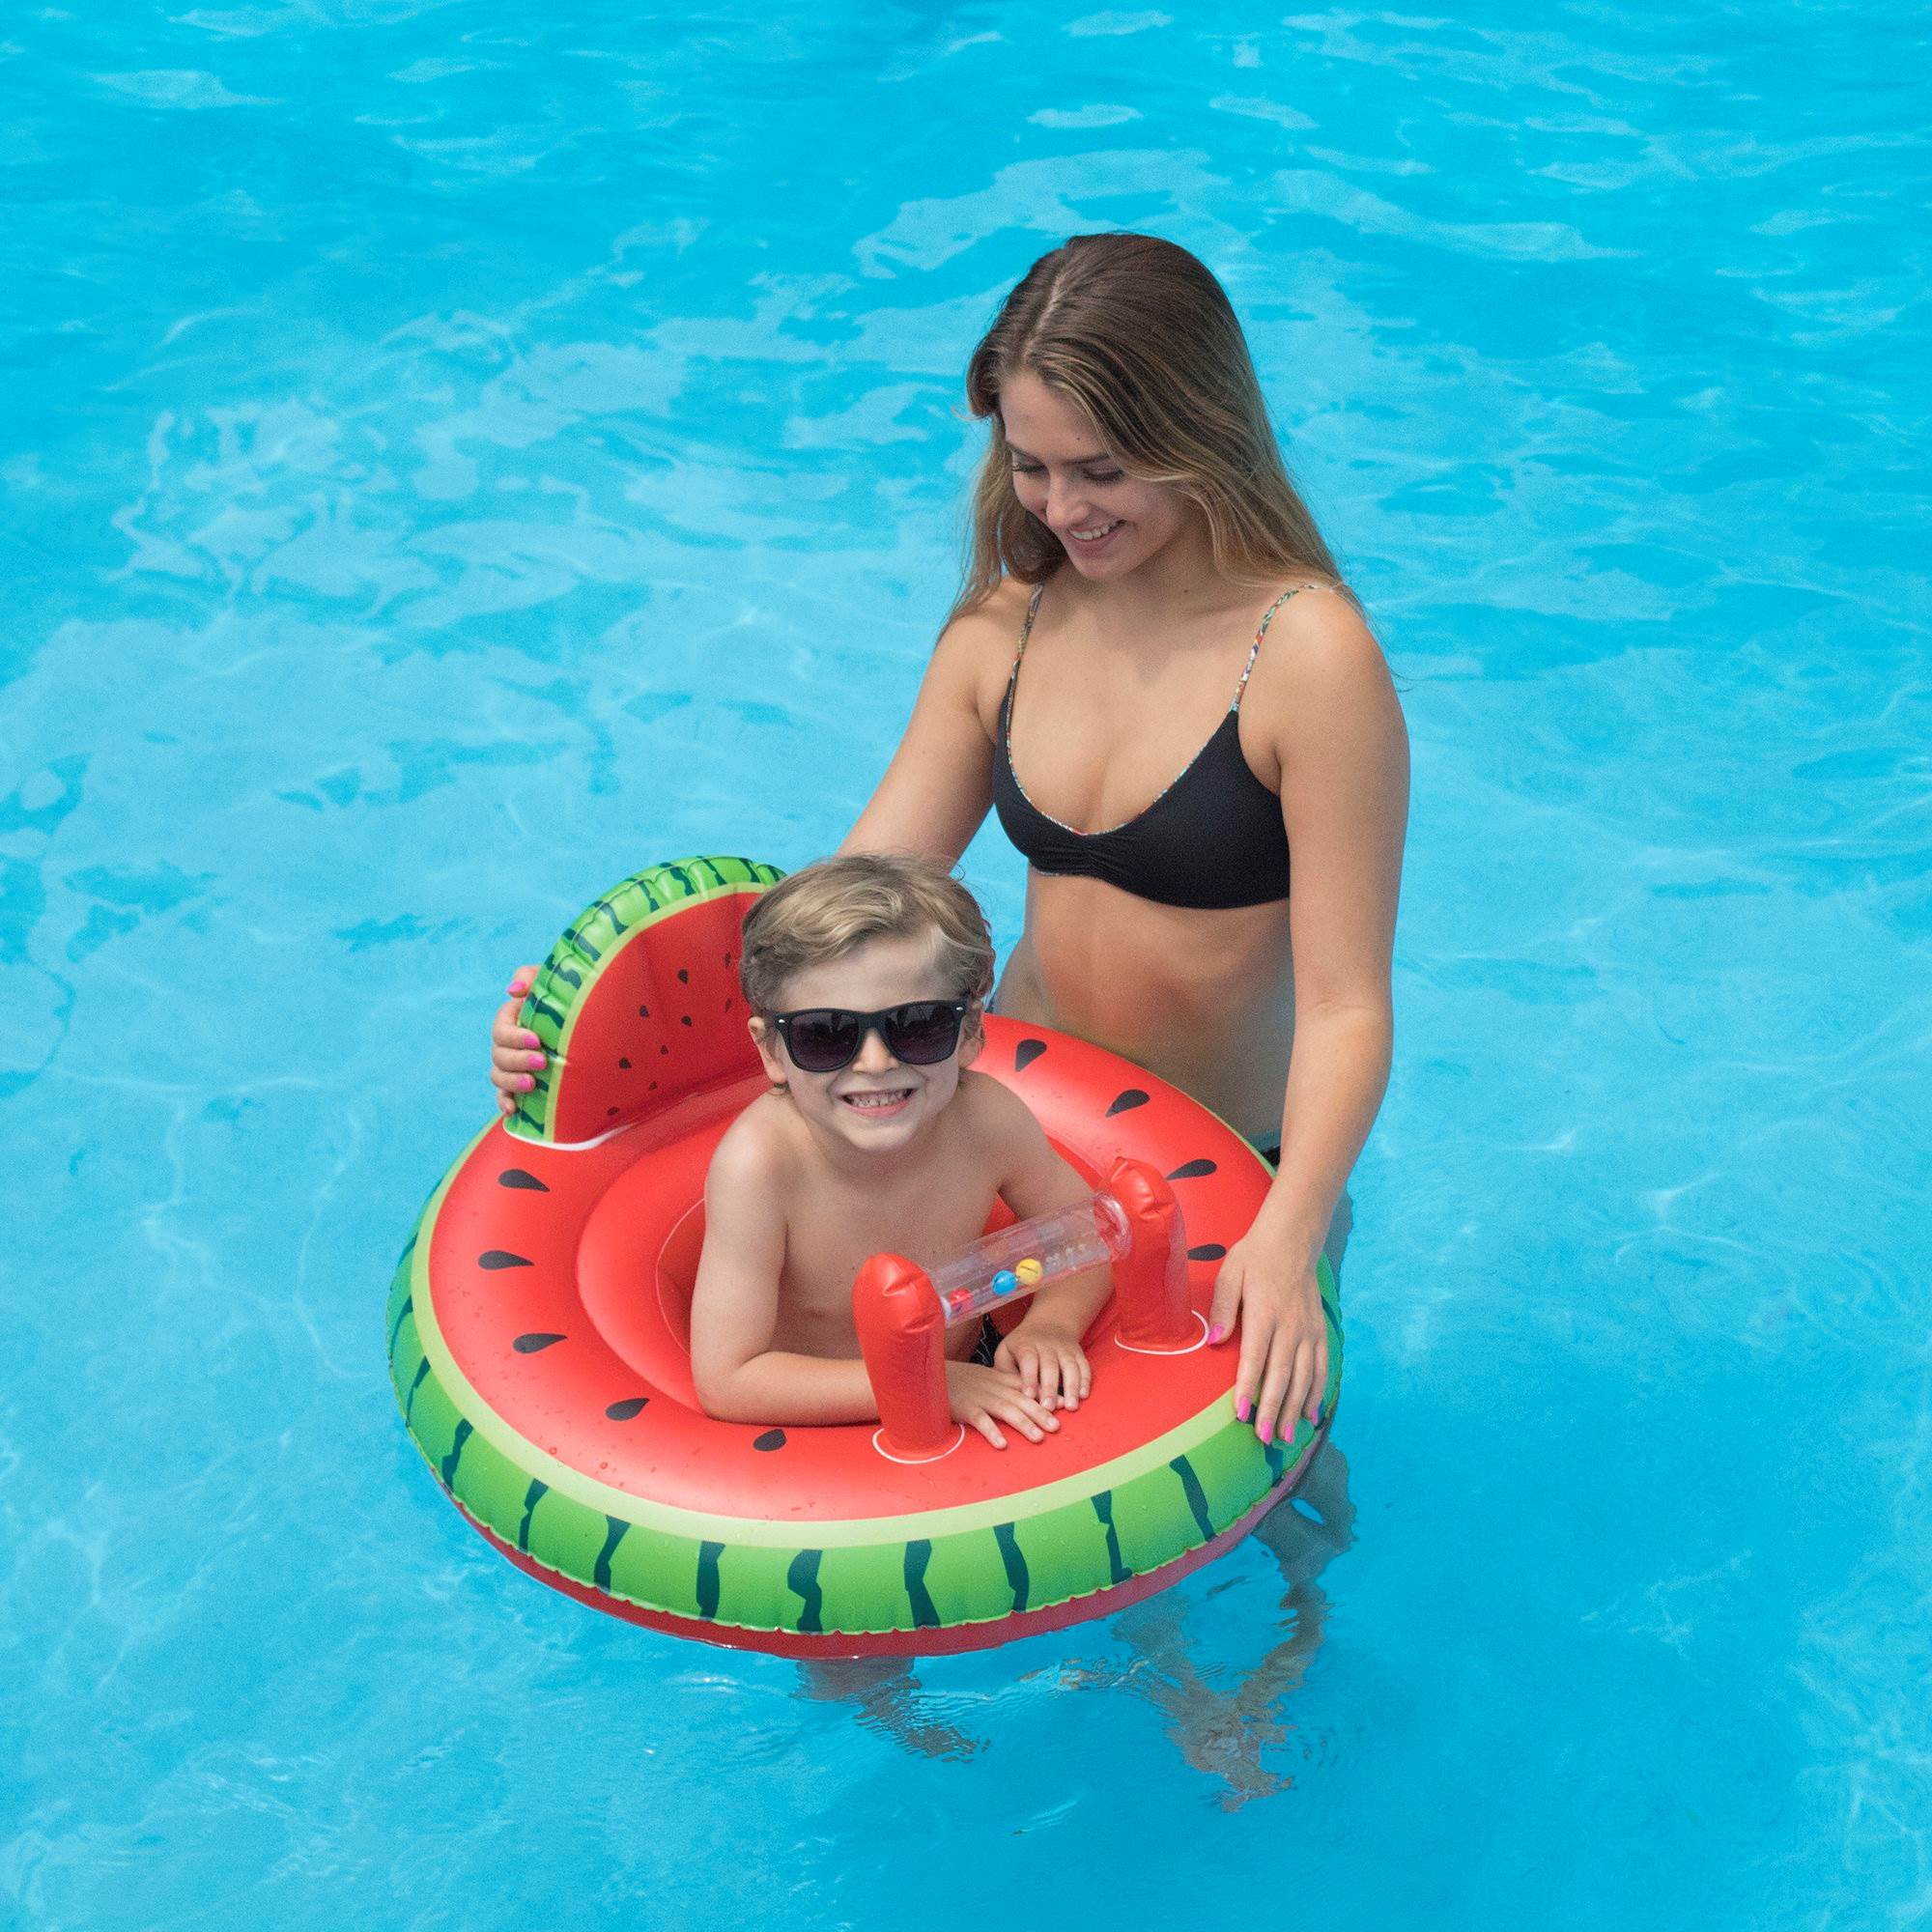 Swimline Watermelon Baby Seat Pool Inflatable Ride-On, Red, Green - image 5 of 5